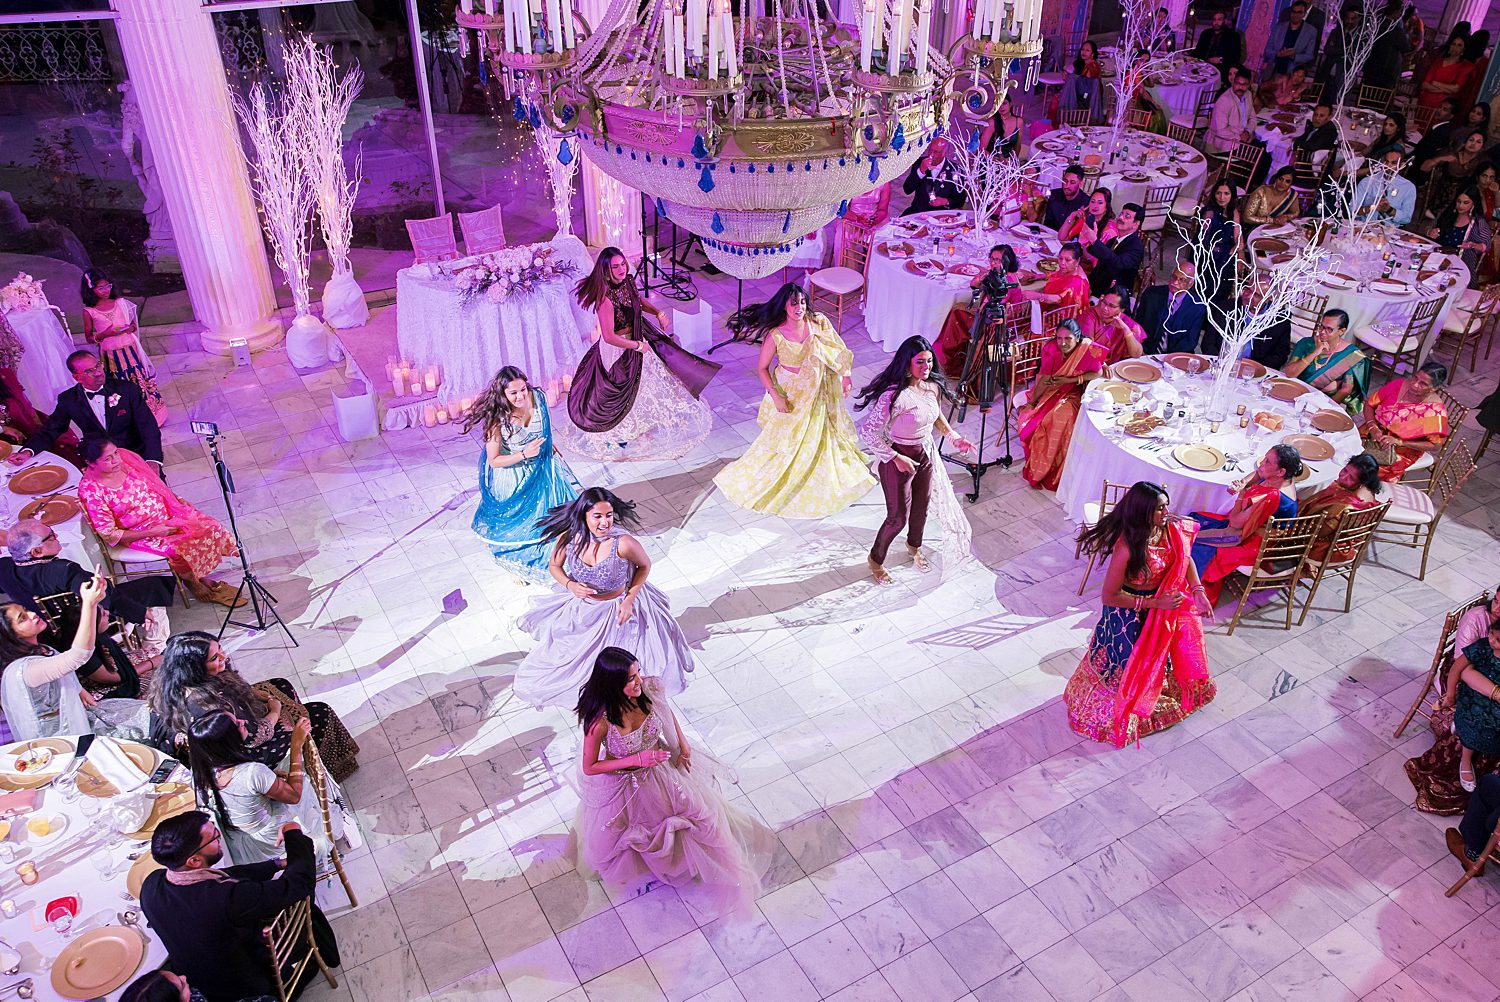 bridesmaids do traditional Indian dance during reception